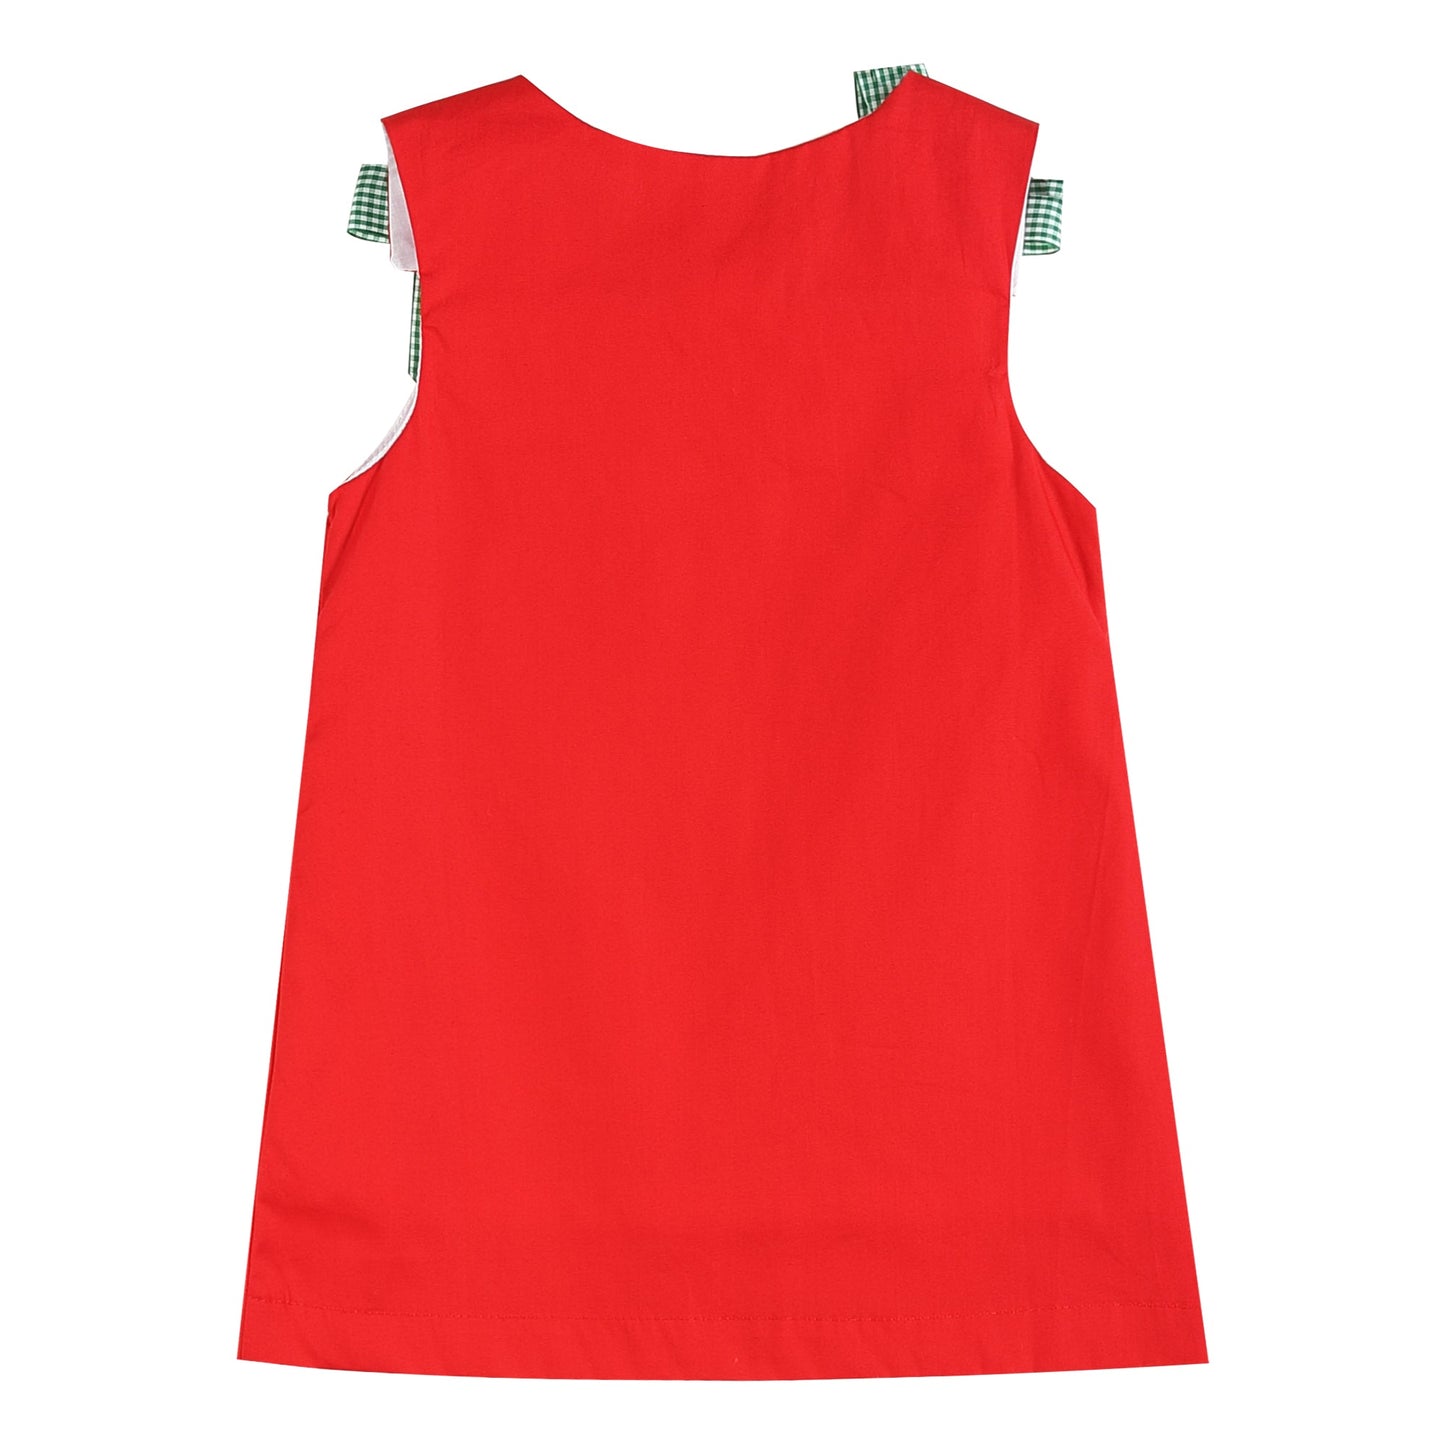 Red Reindeer with PomPoms and Bows Swing Dress